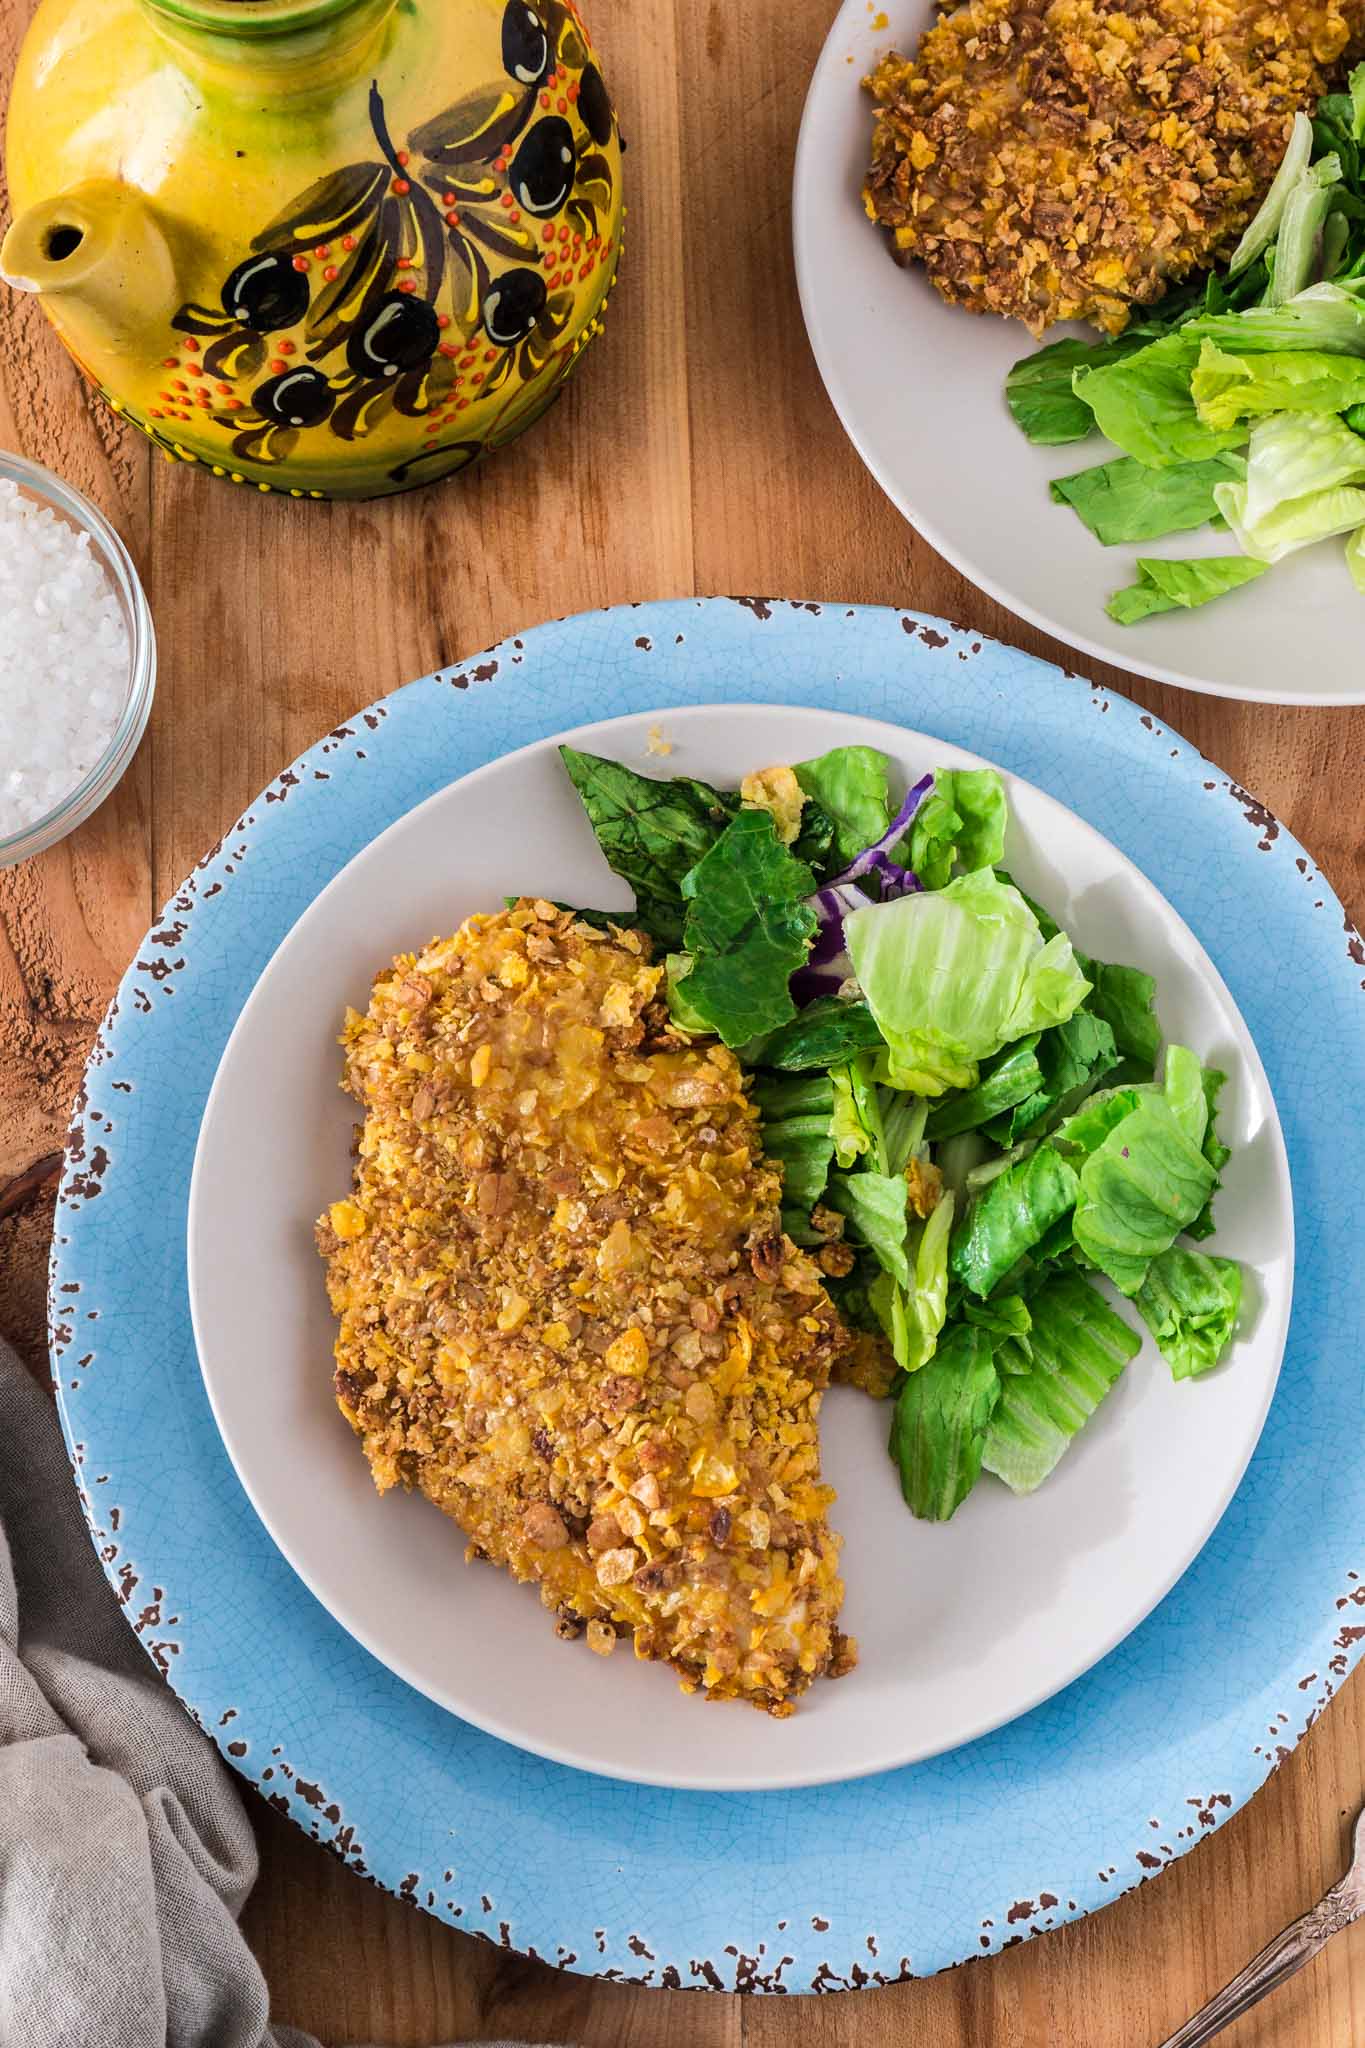 Cereal Crusted Chicken | www.oliviascuisine.com | Looking for fun but healthy chicken dinner options for the family? This Cereal Crusted Chicken is the answer! Juicy, amazingly crunchy and slightly sweet from the Honey Bunches of Oats®, it will definitely be a hit with the kids.